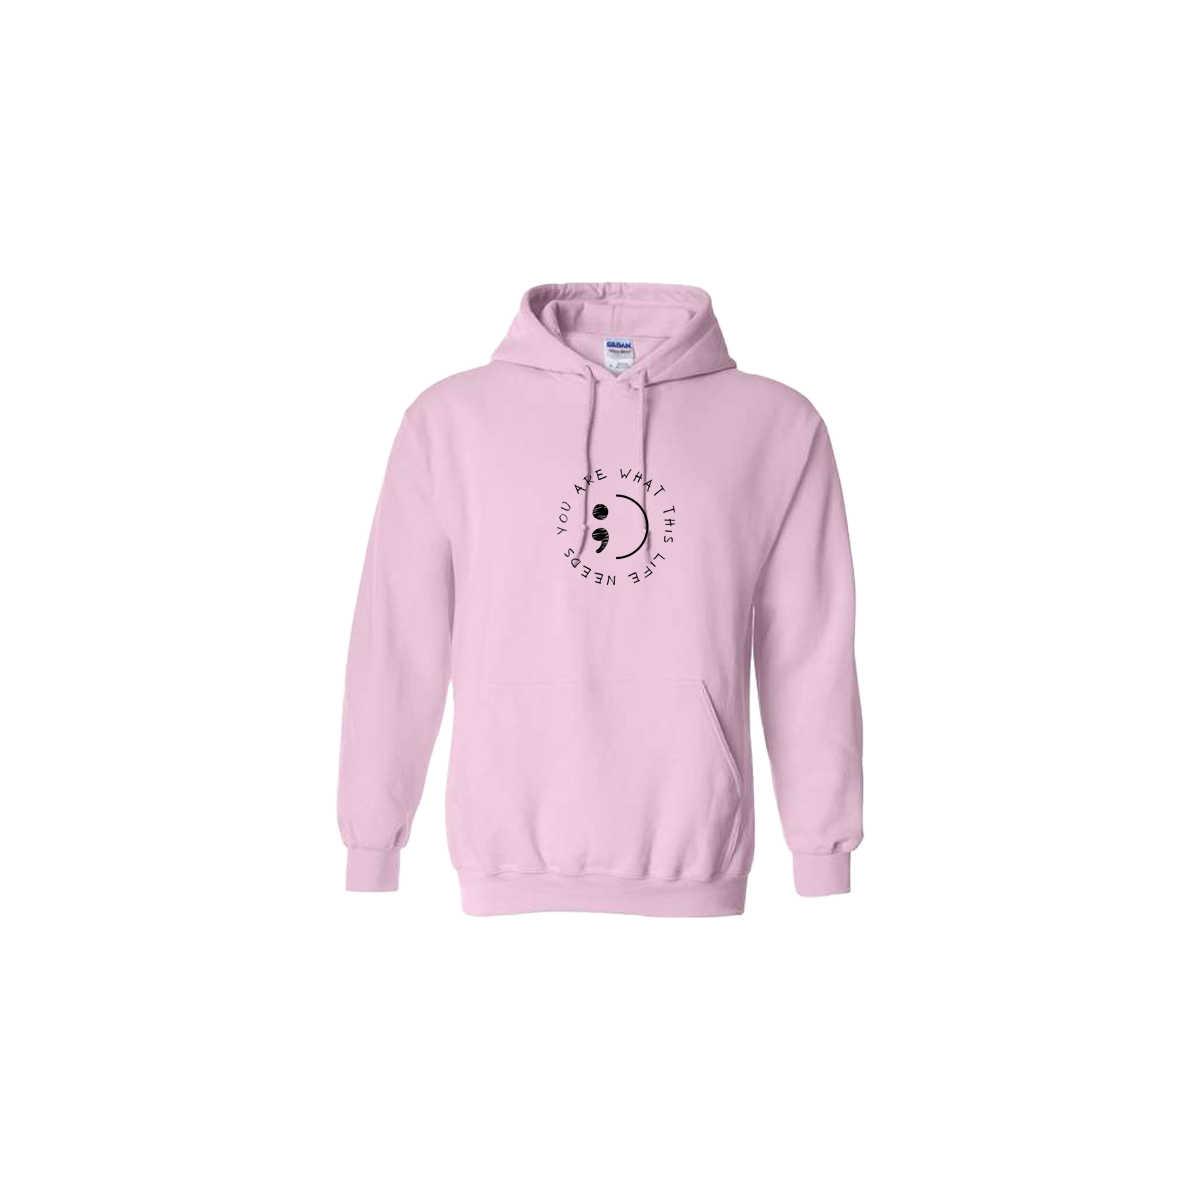 You Are What This Life Needs Embroidered Light Pink Hoodie - Mental Health Awareness Clothing